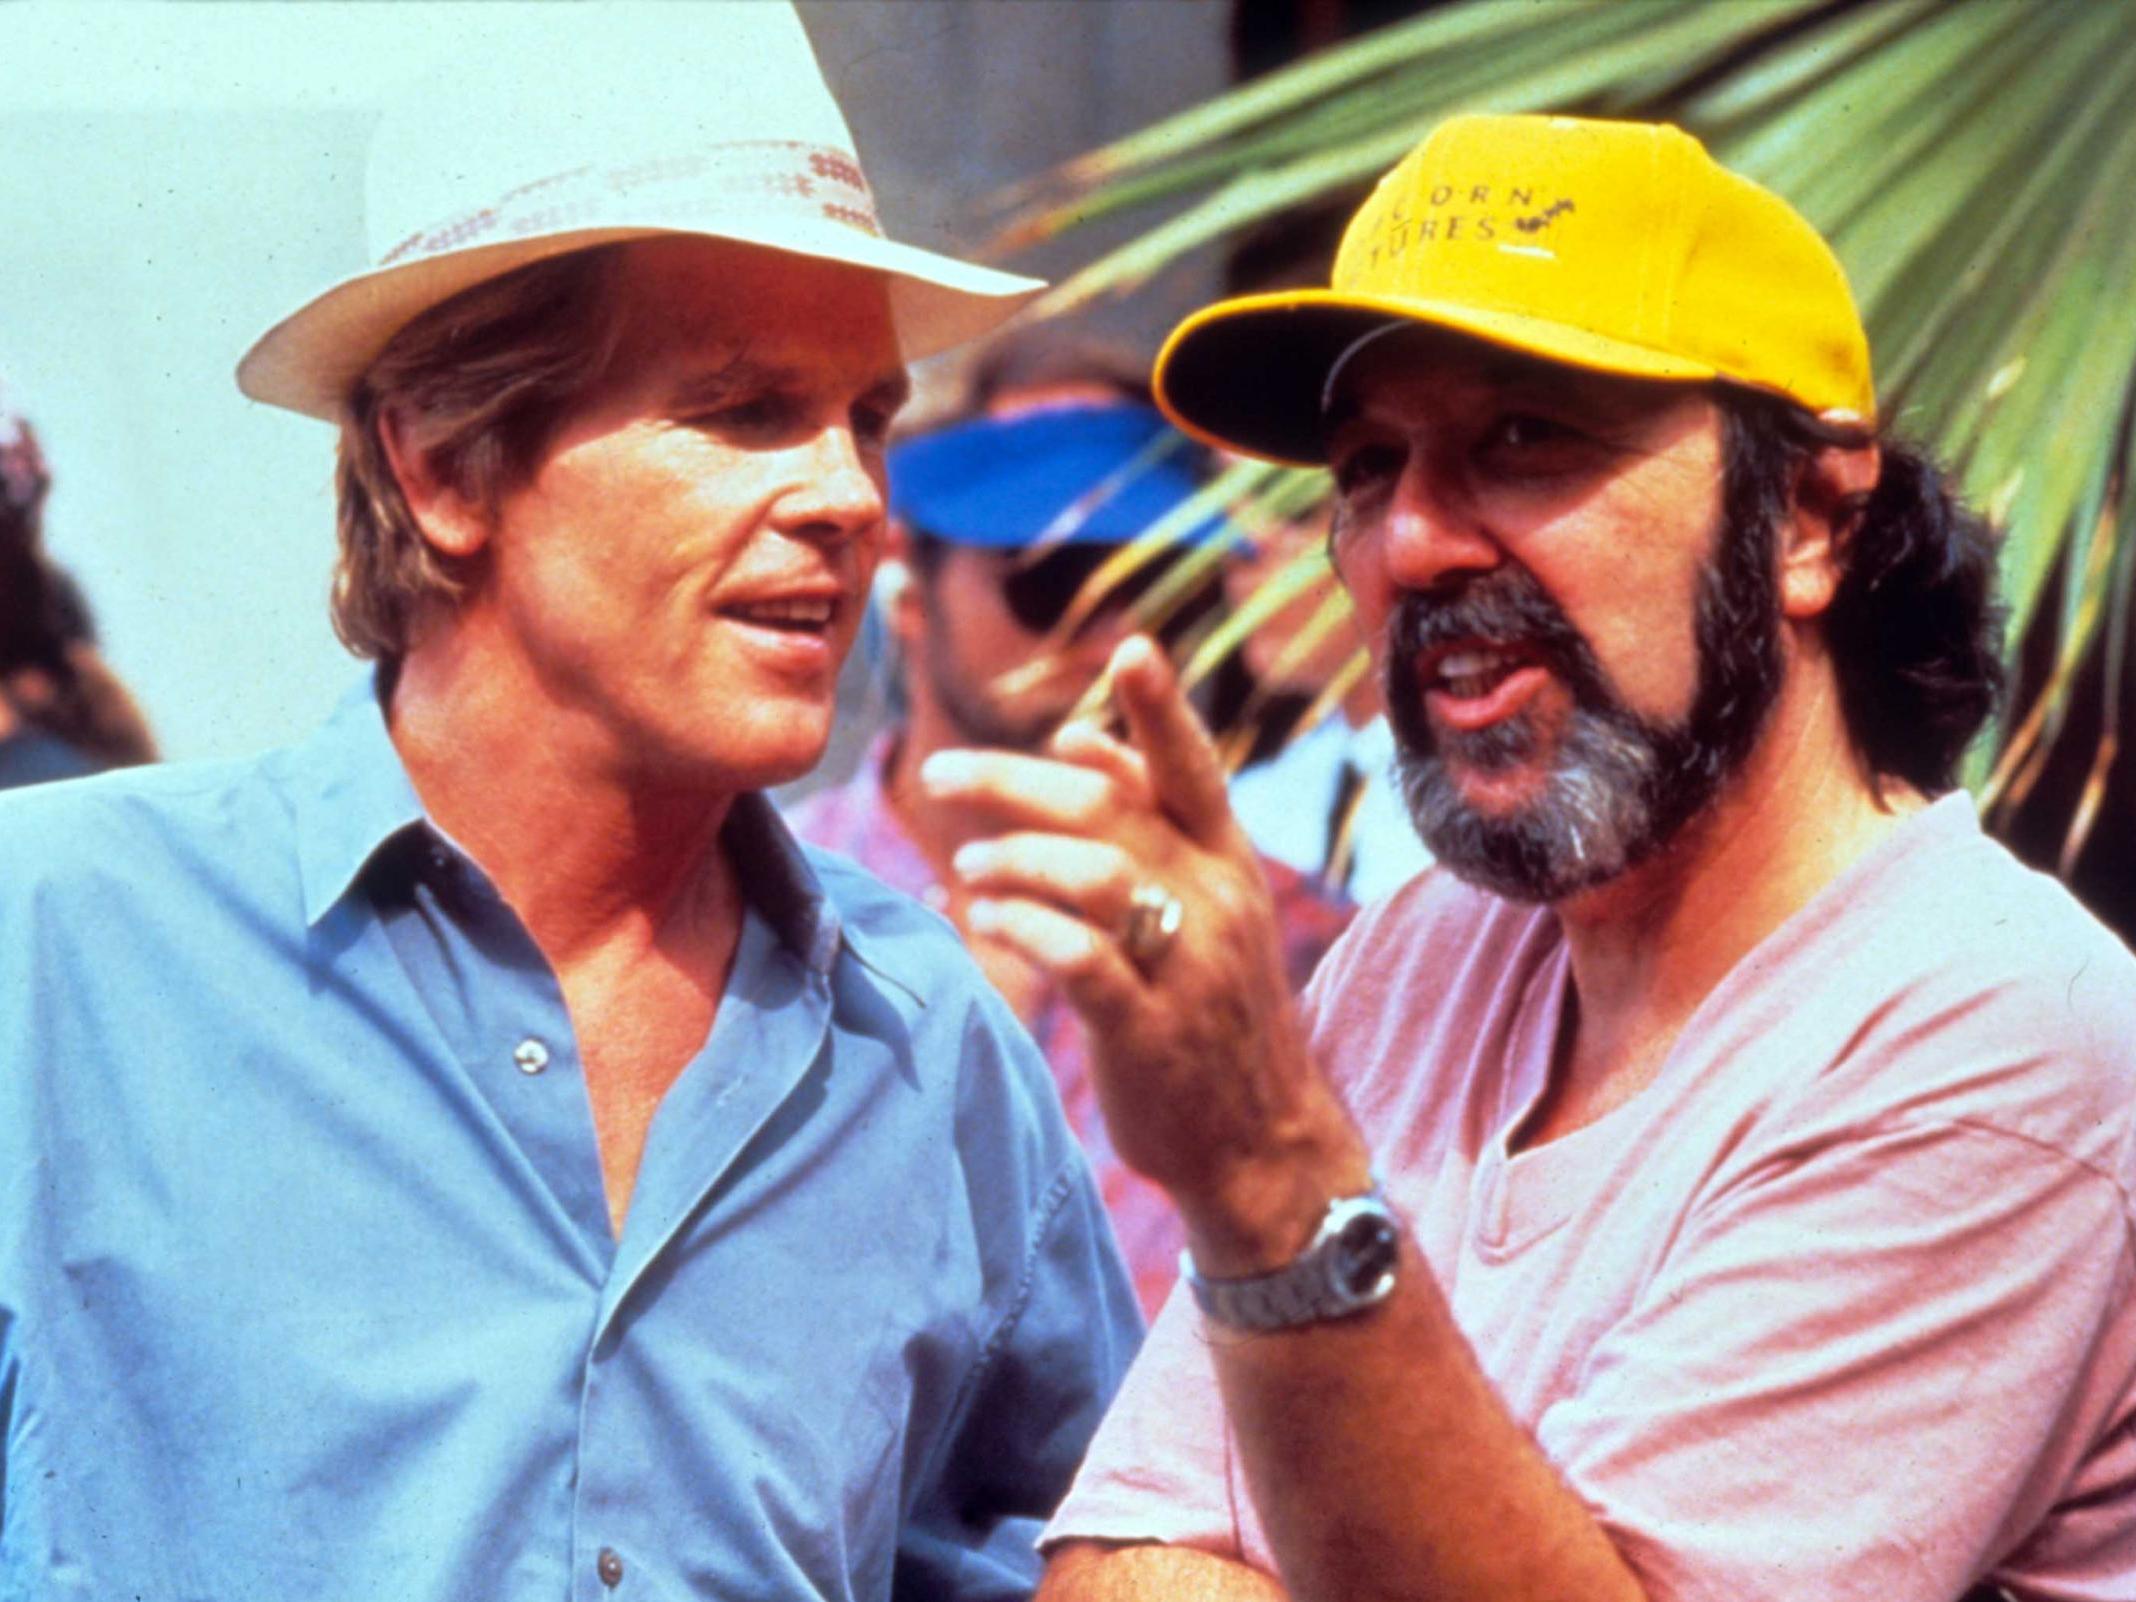 Nick Nolte and James L Brooks on the set of ‘I’ll Do Anything’